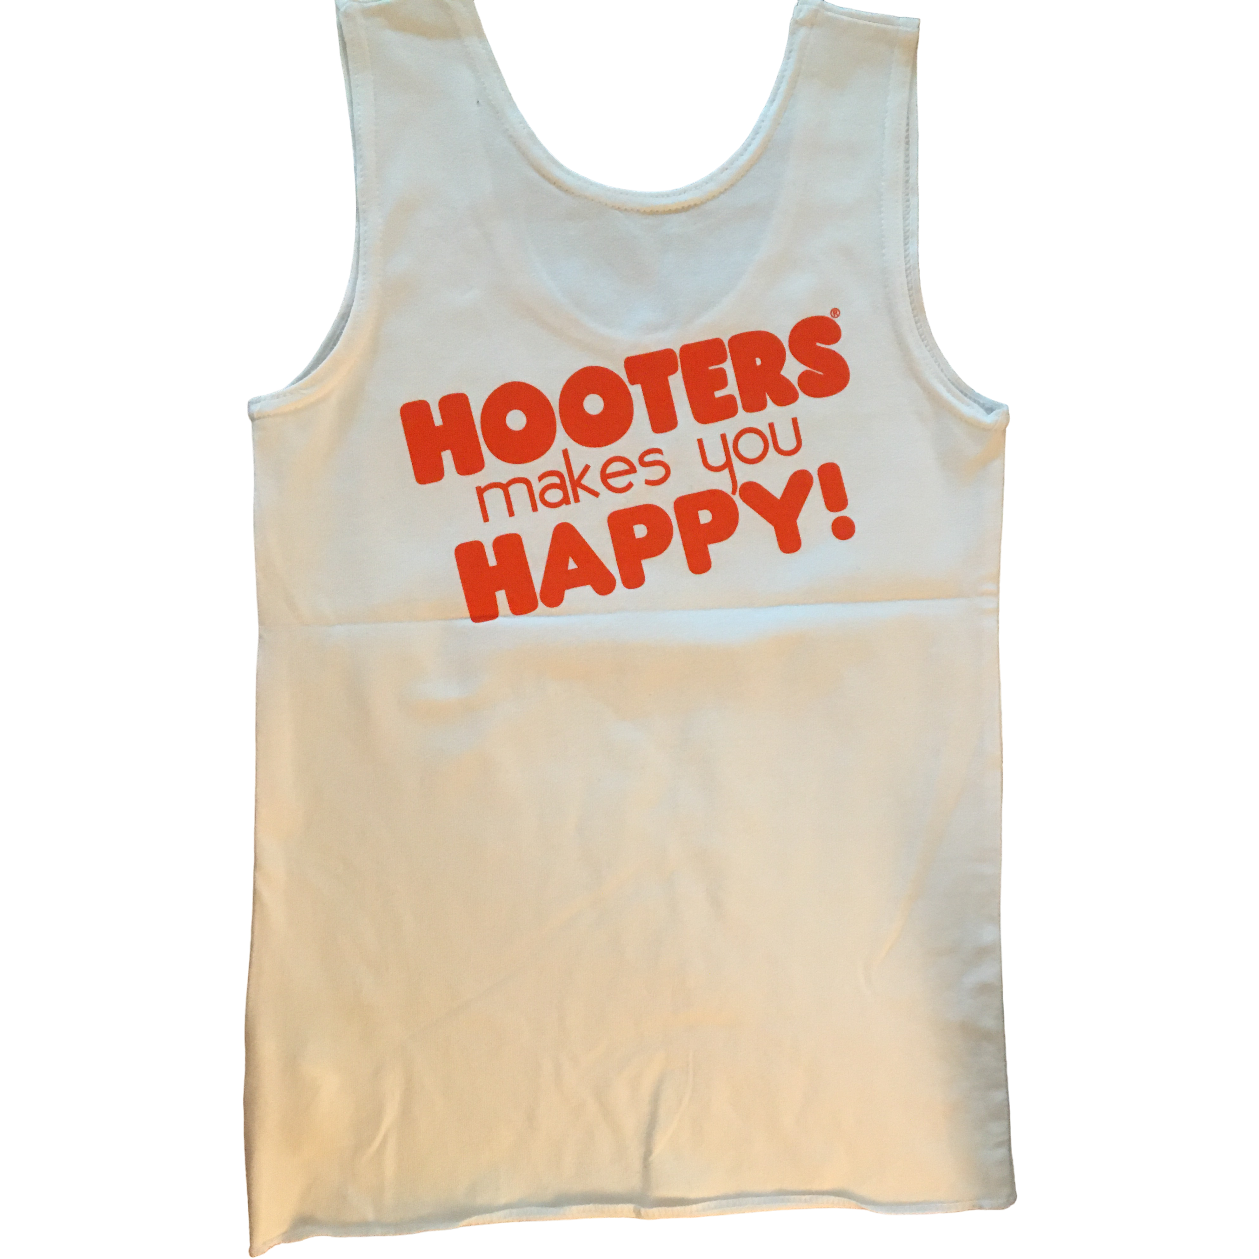 Hooters Women's Outfit Costume Spandex White Tank Top